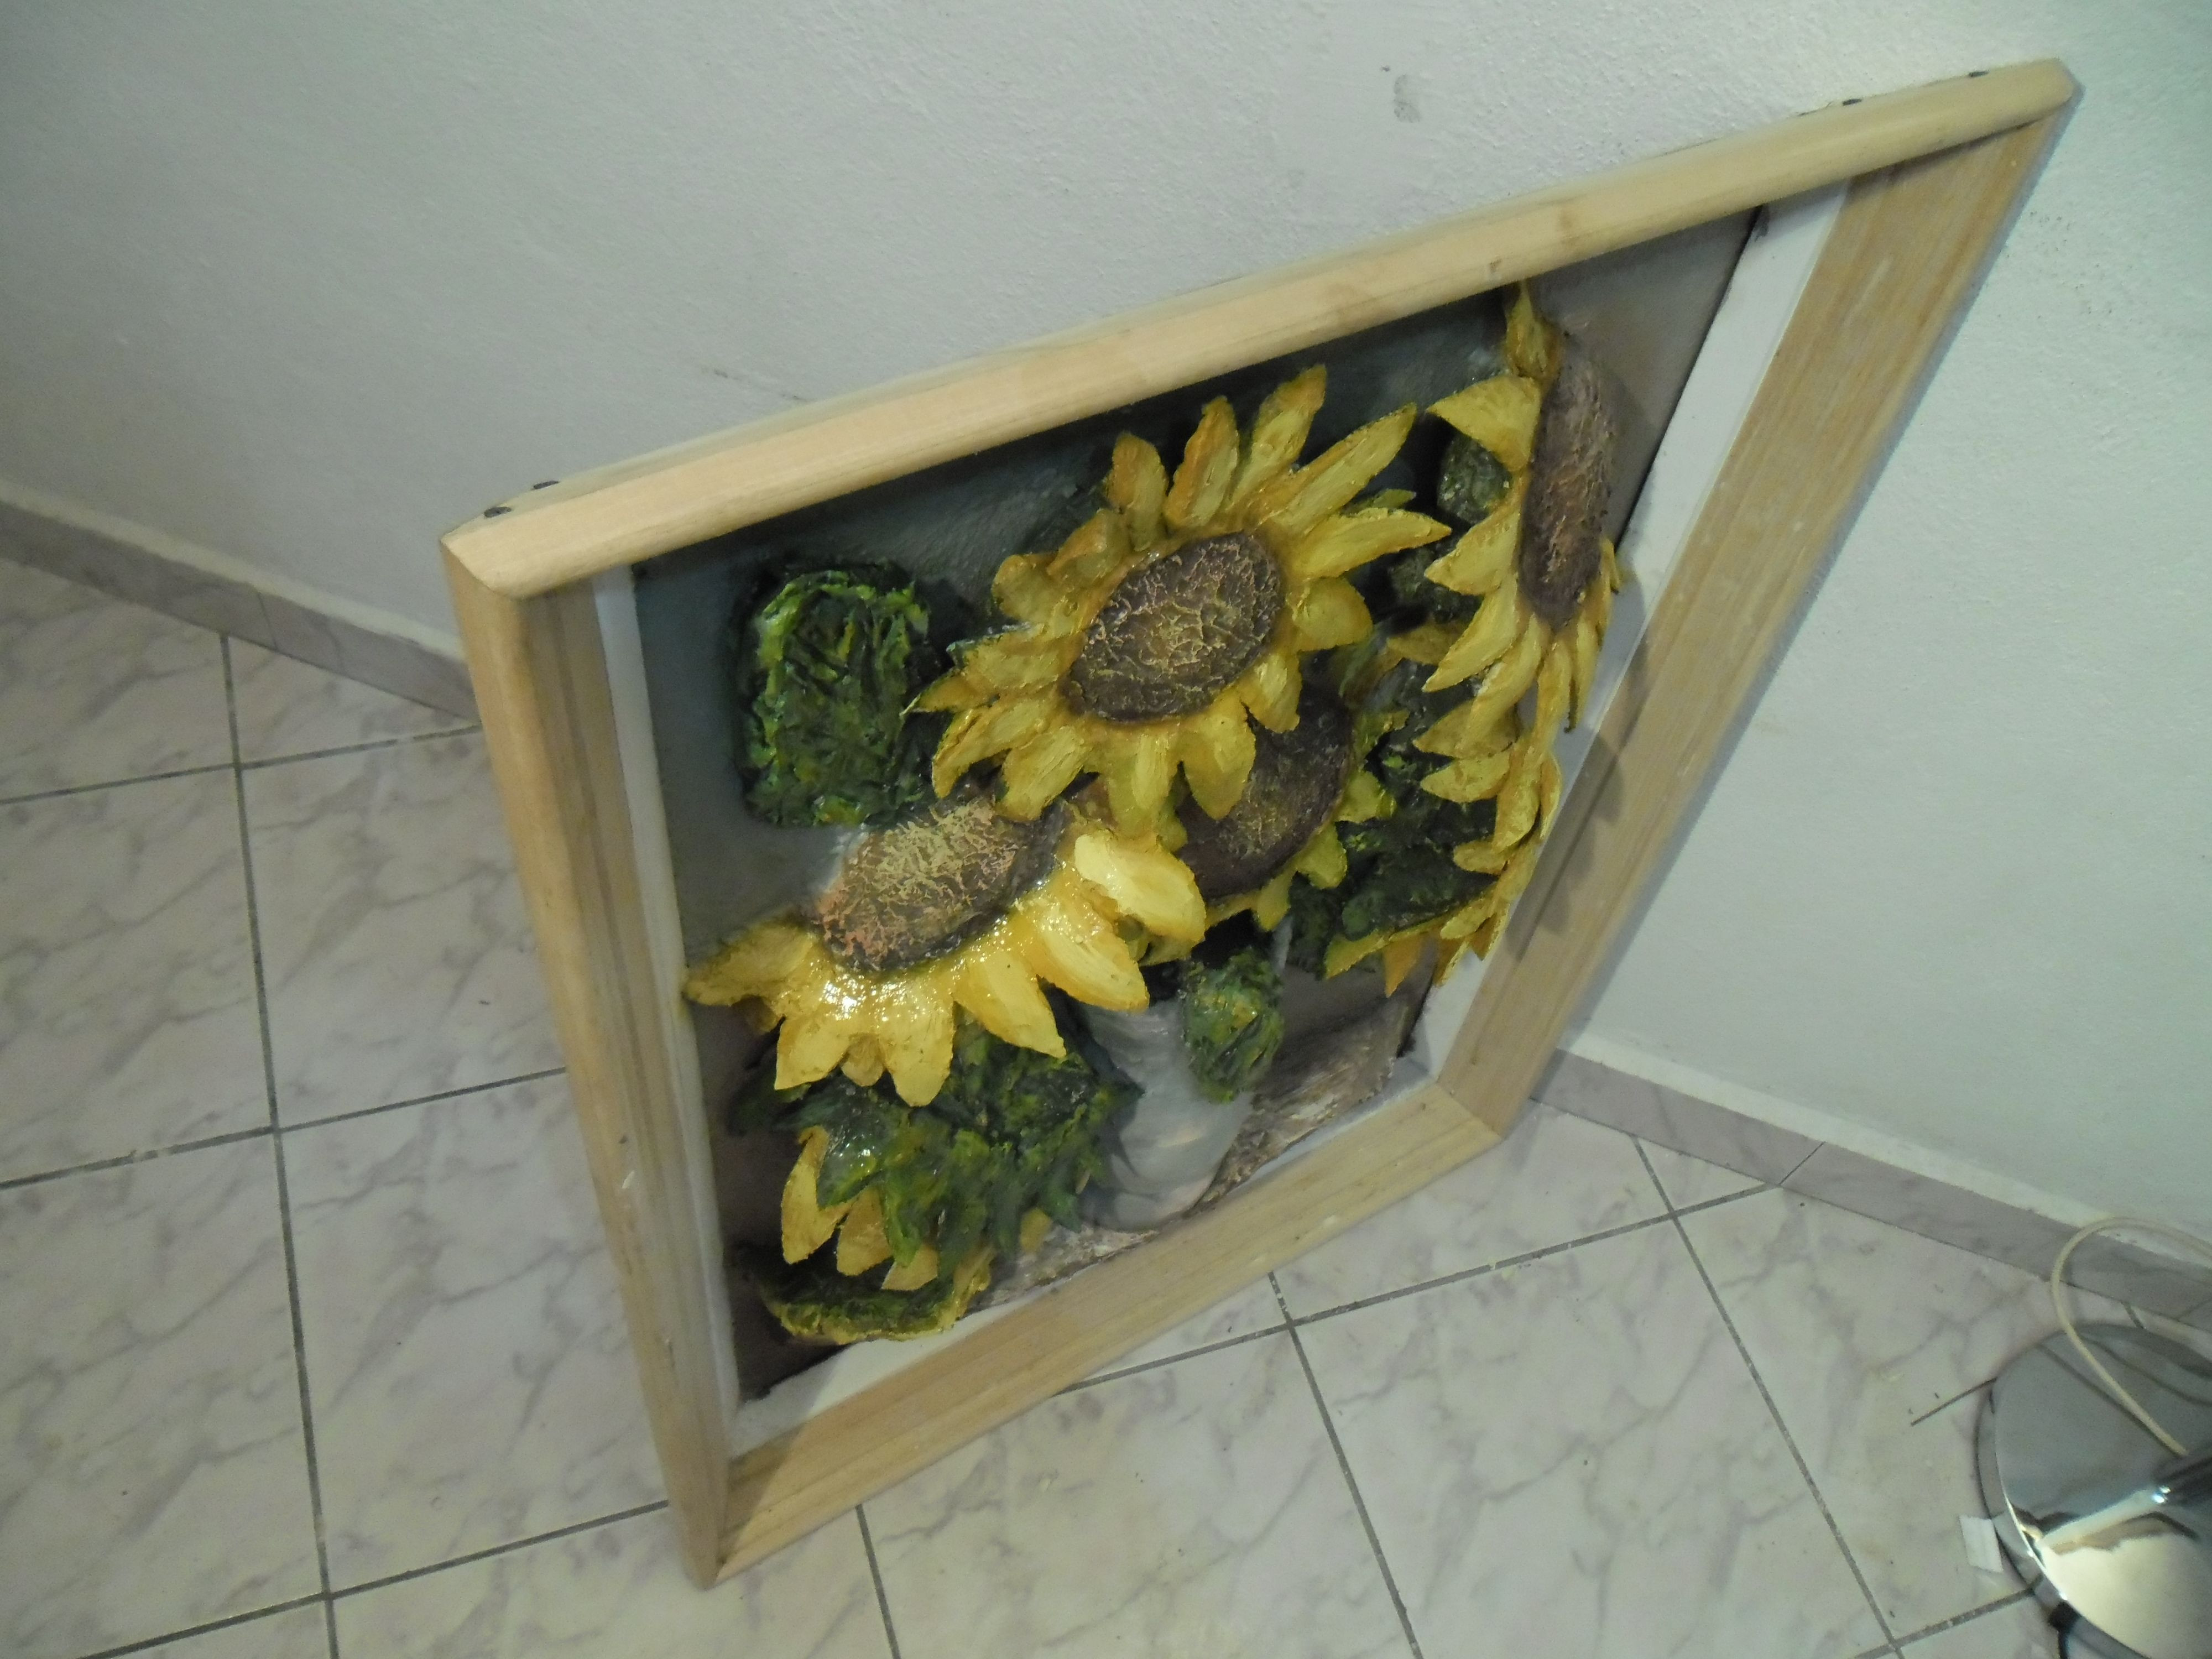 vase of sunflowers painting of top view of the sunflower vase painting adamart paintings bas inside top view of the sunflower vase painting